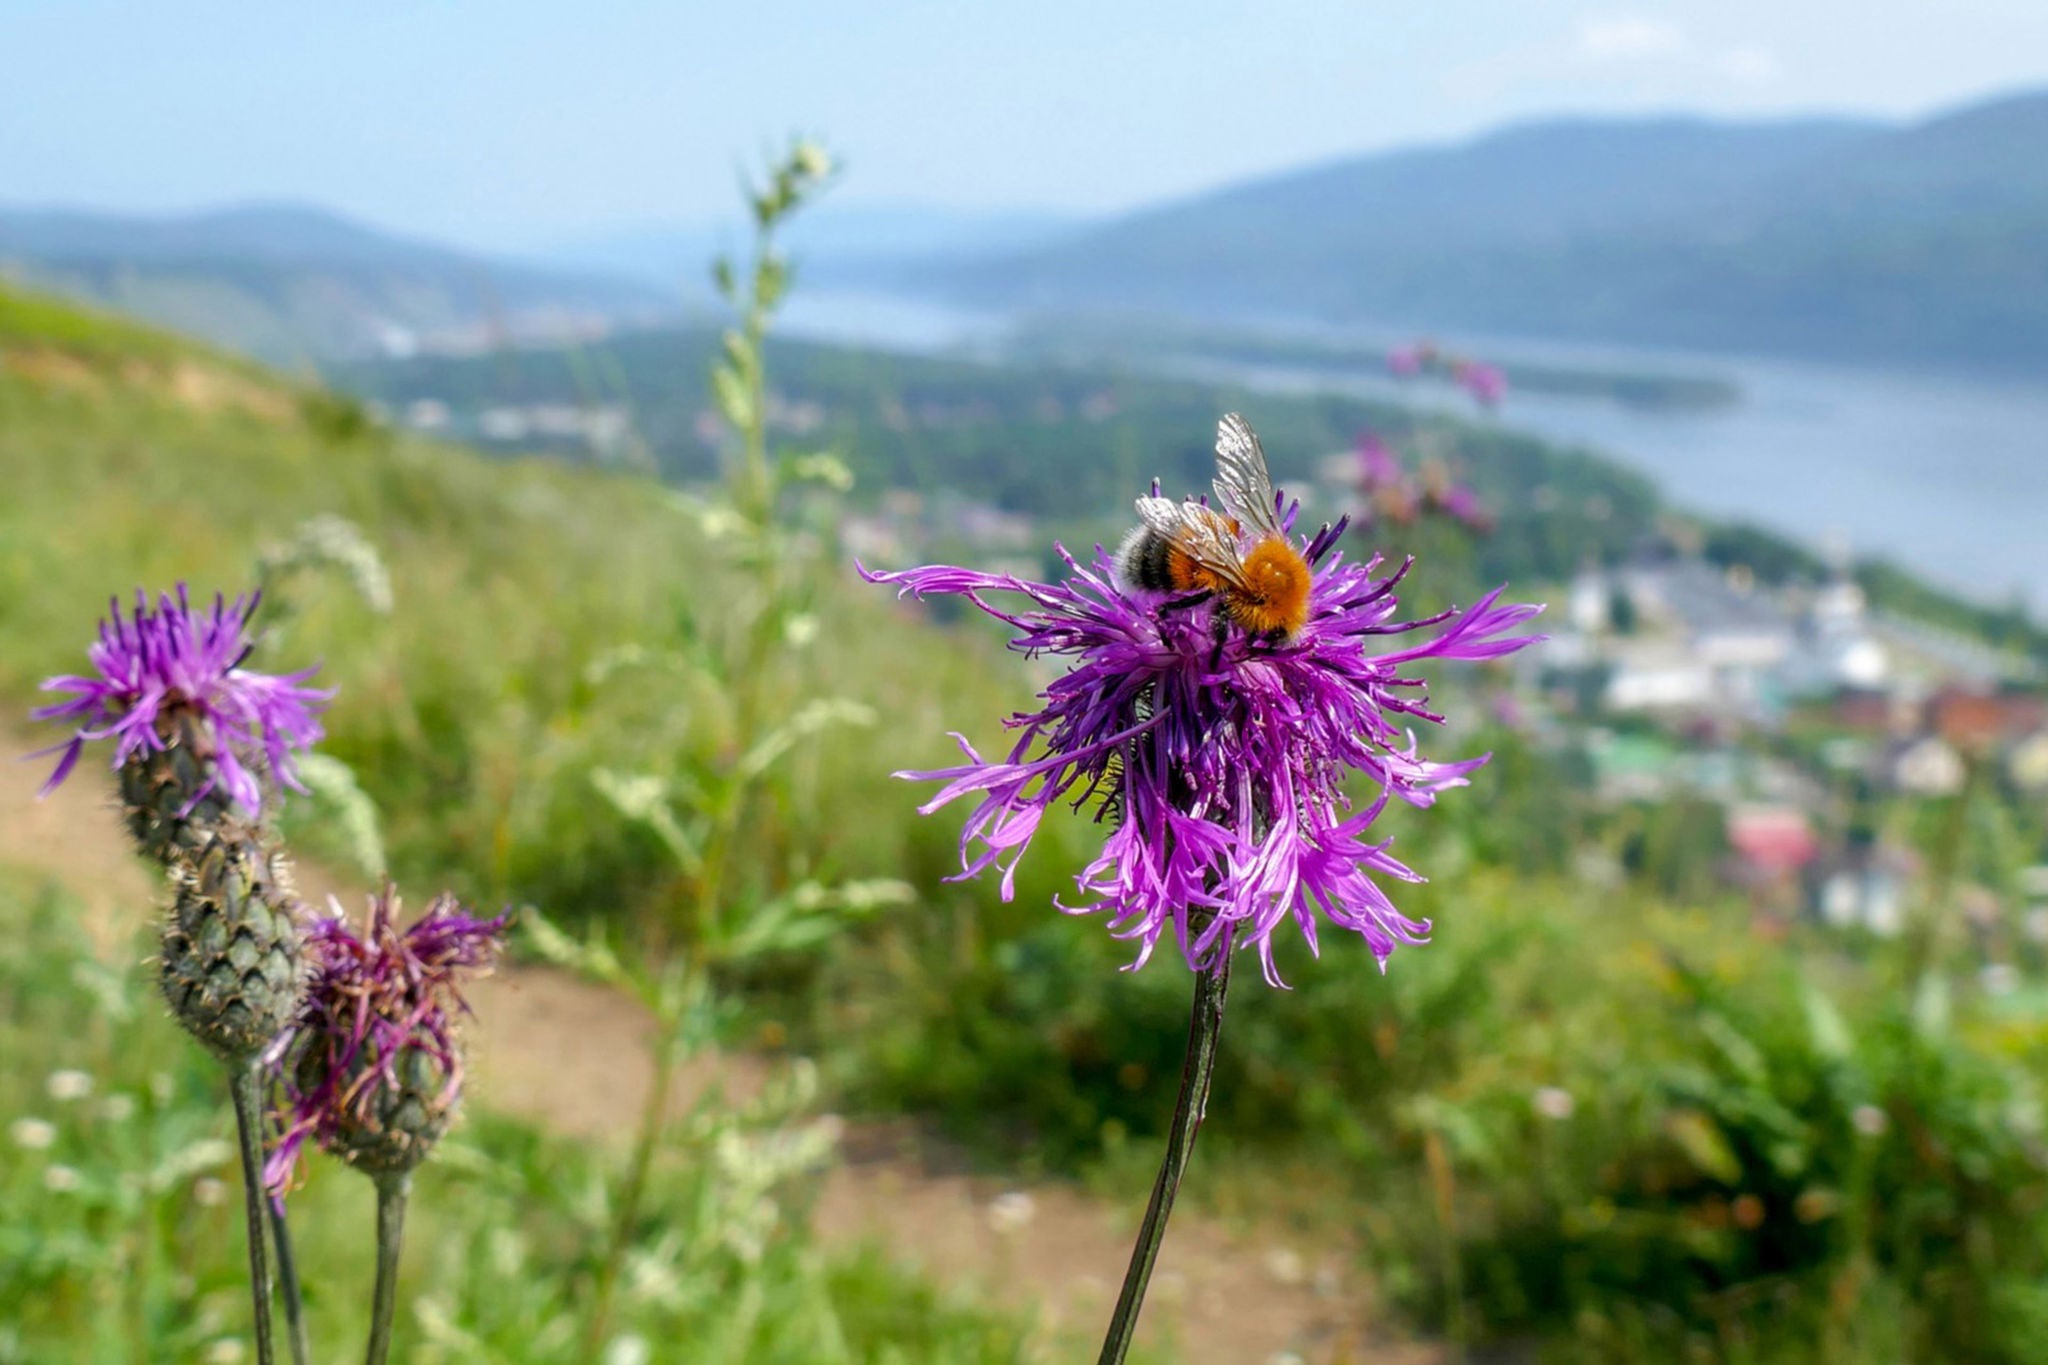 Blooming thistle on the banks of the Yenisei river